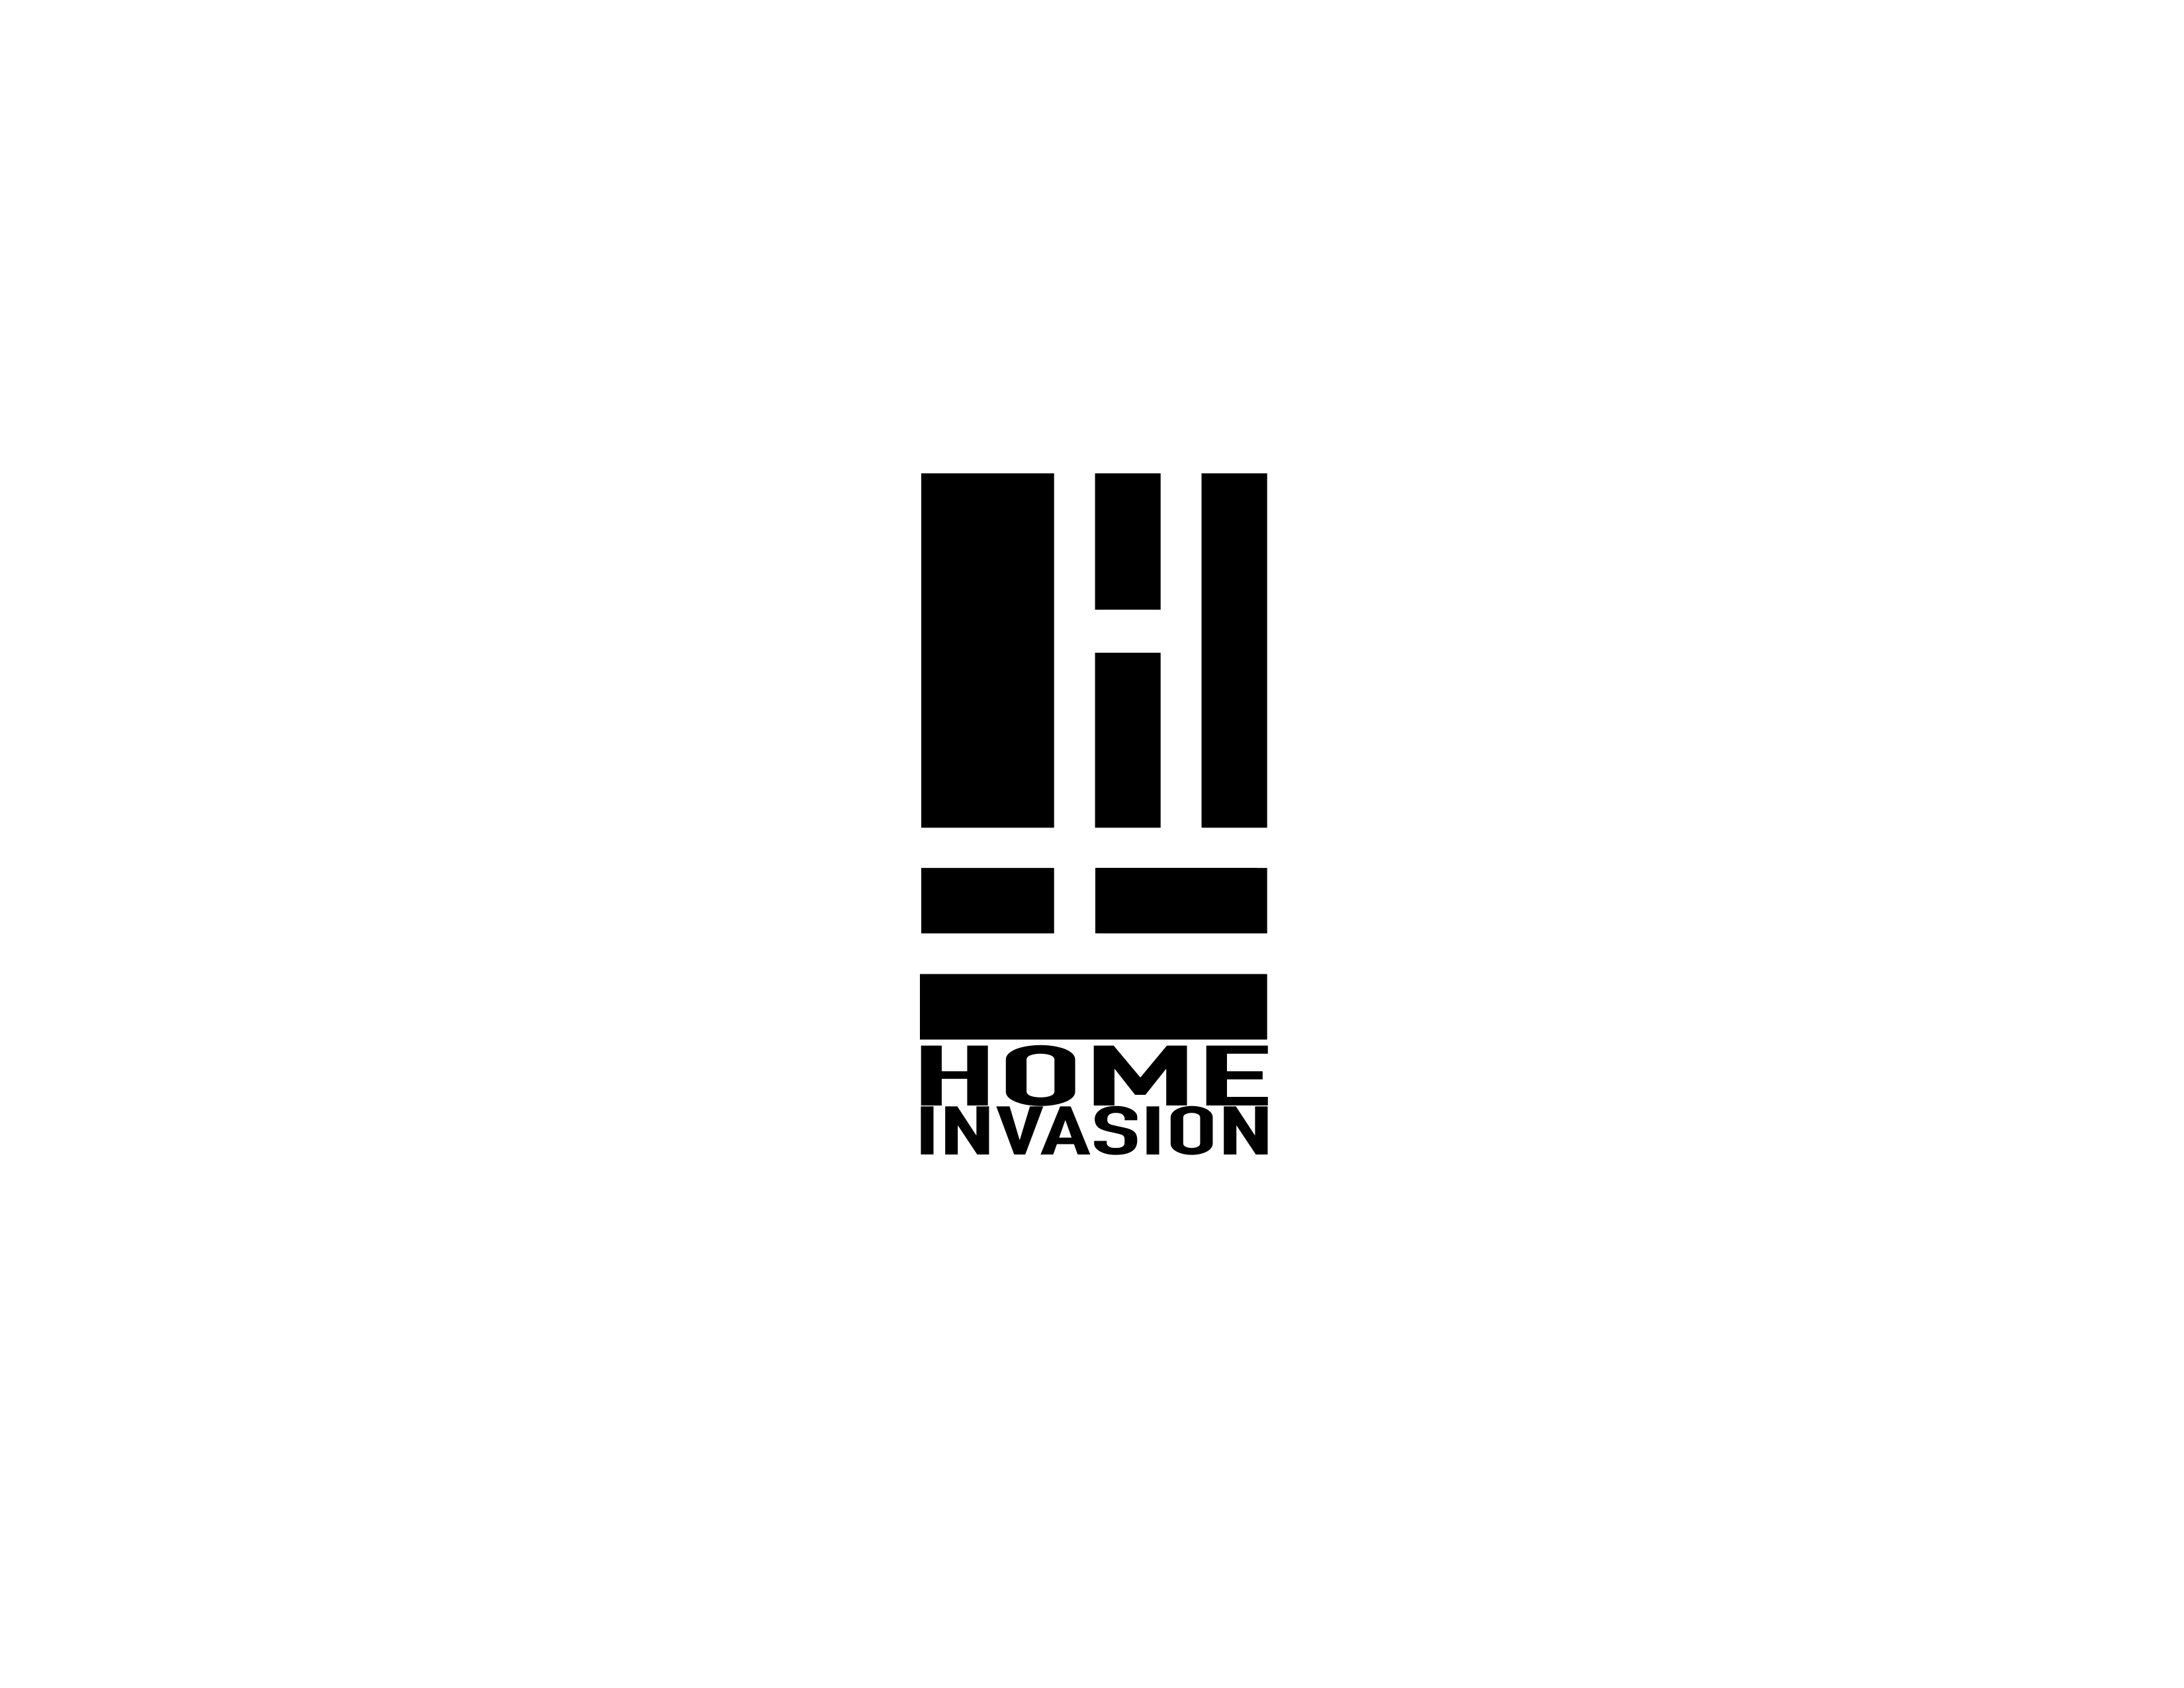 We are Home Invasion, a new experimental band in Chicago! Demo album in the works and live shows on the way, so stay tuned!